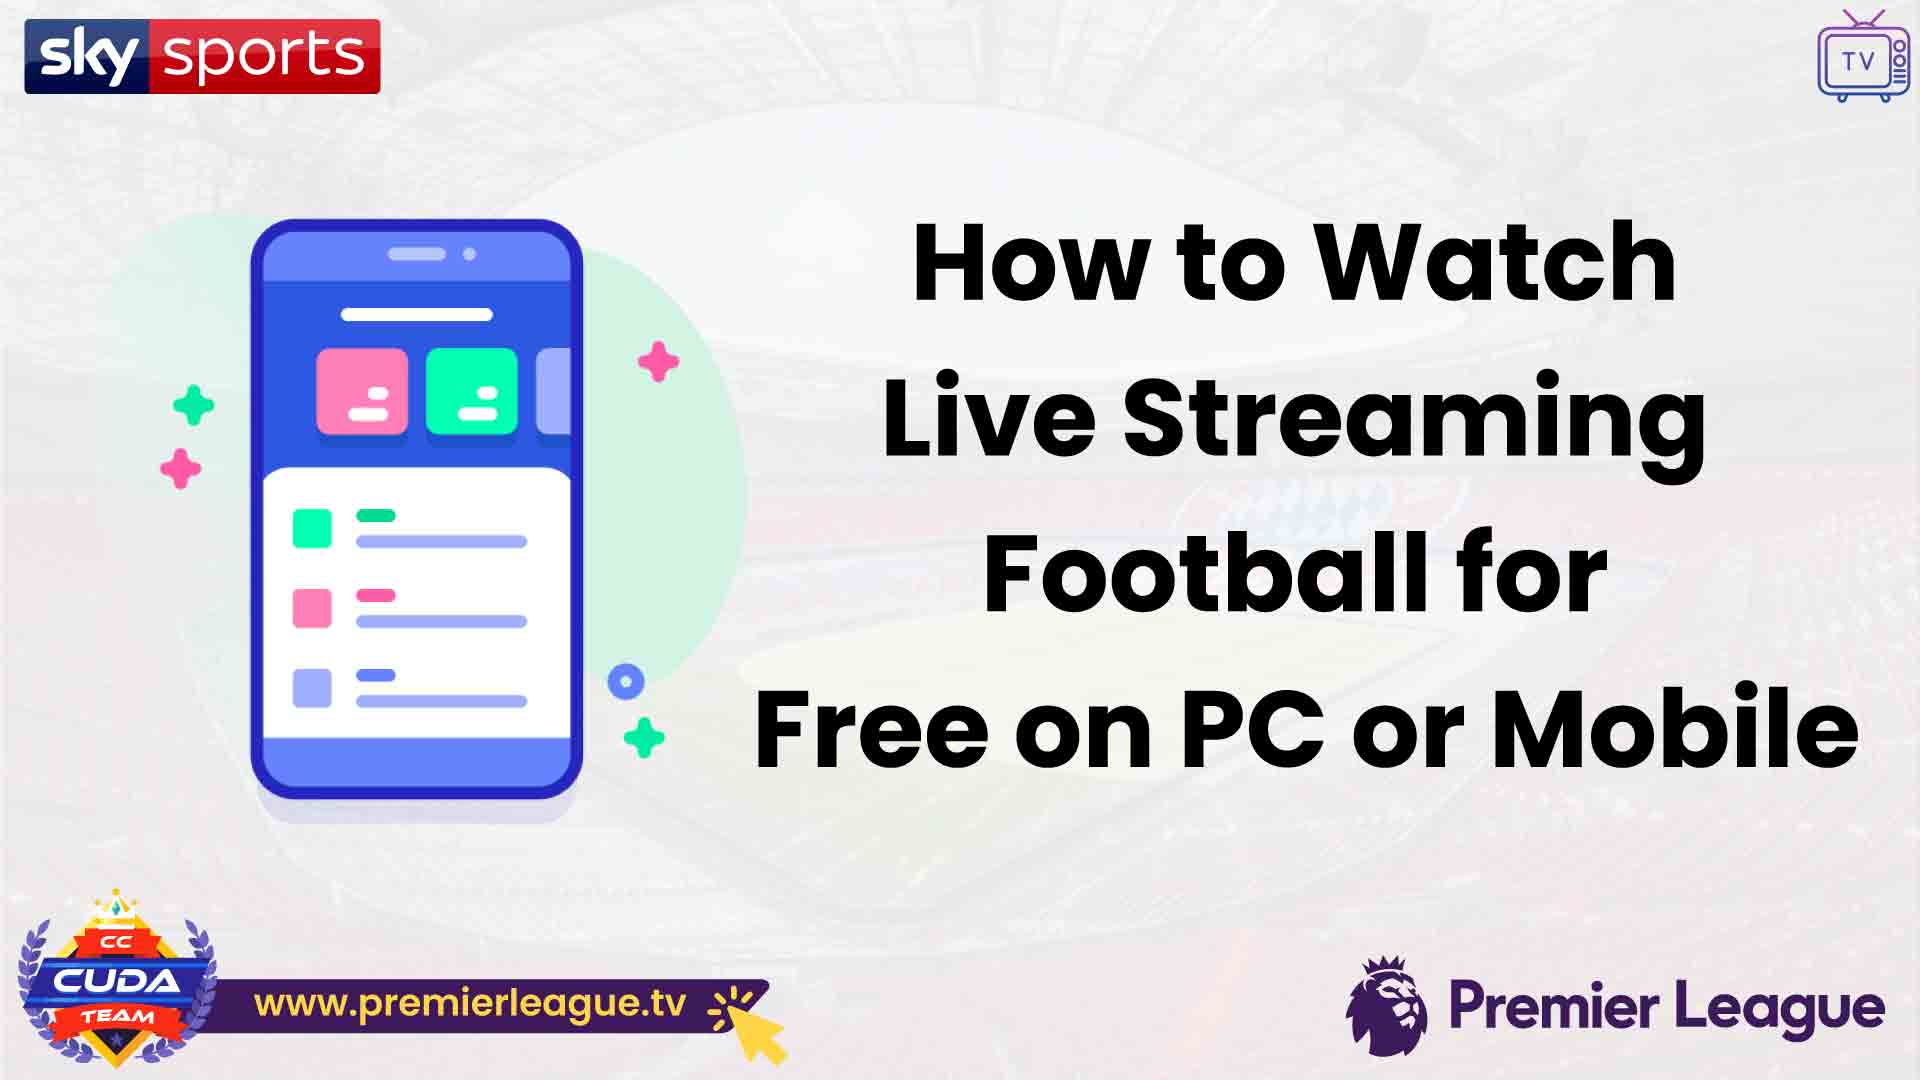 How to Watch Live Streaming Football for Free on PC or Mobile